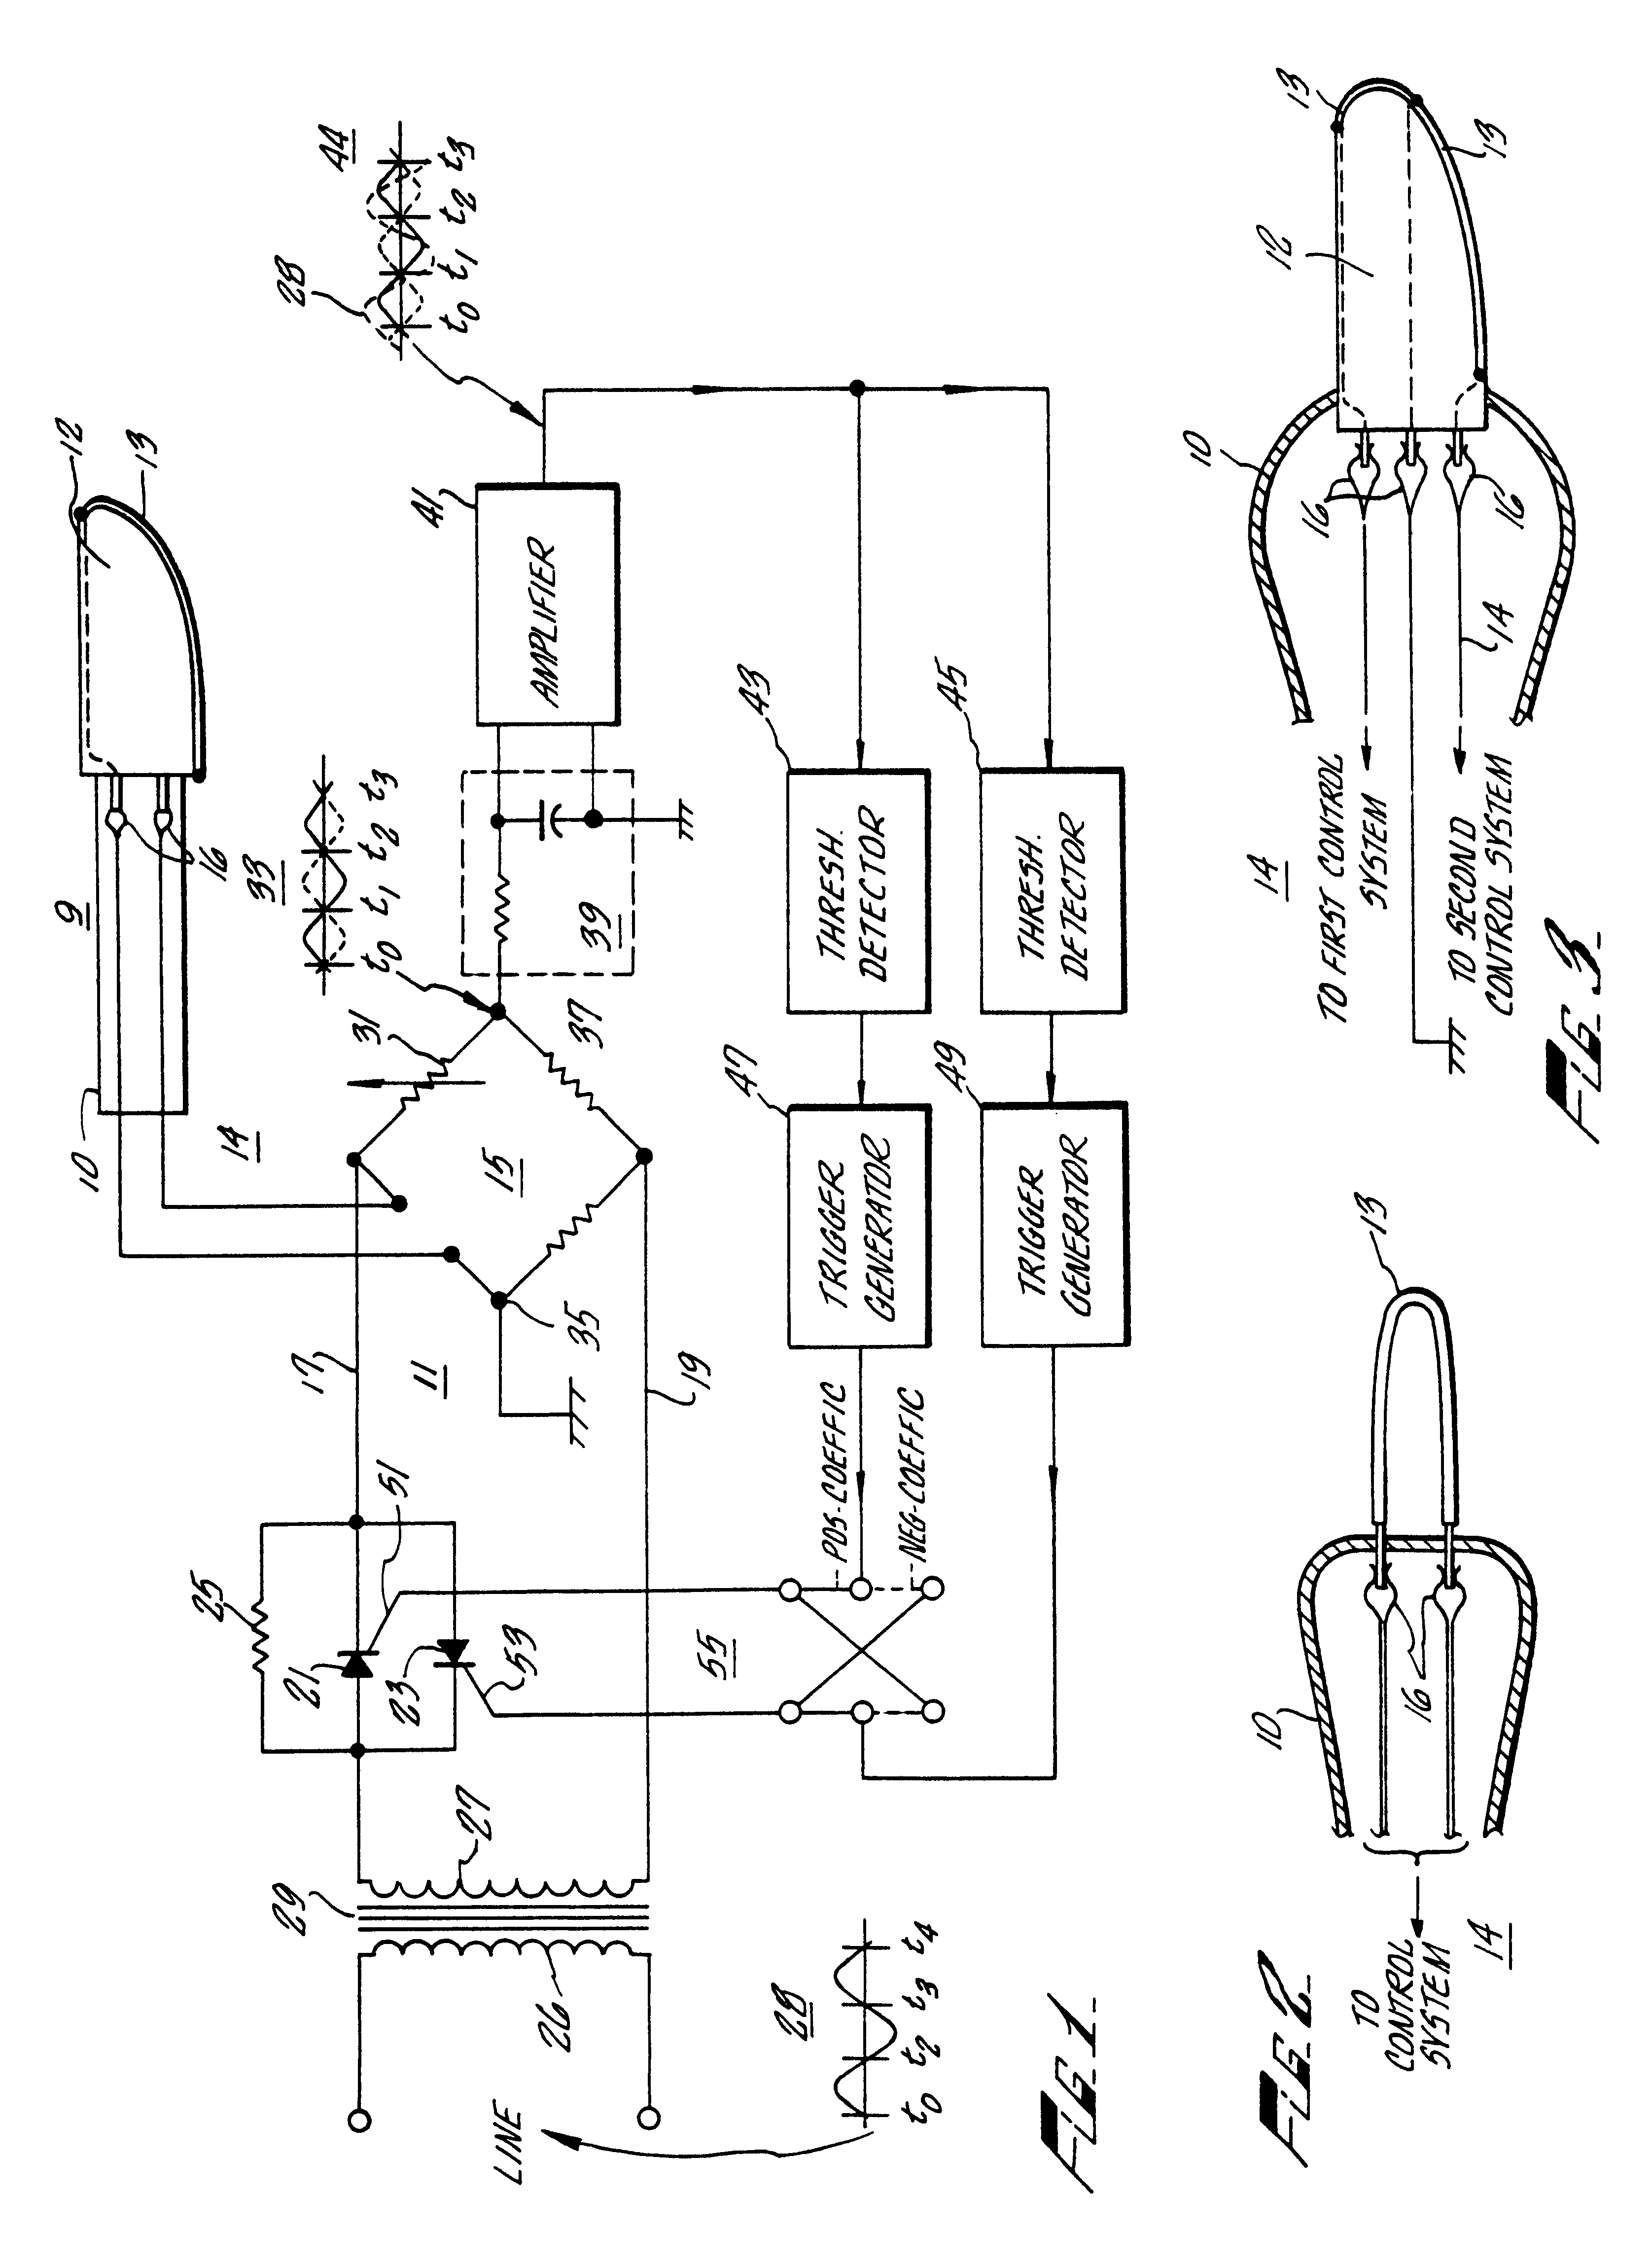 Electrically heated surgical cutting instrument